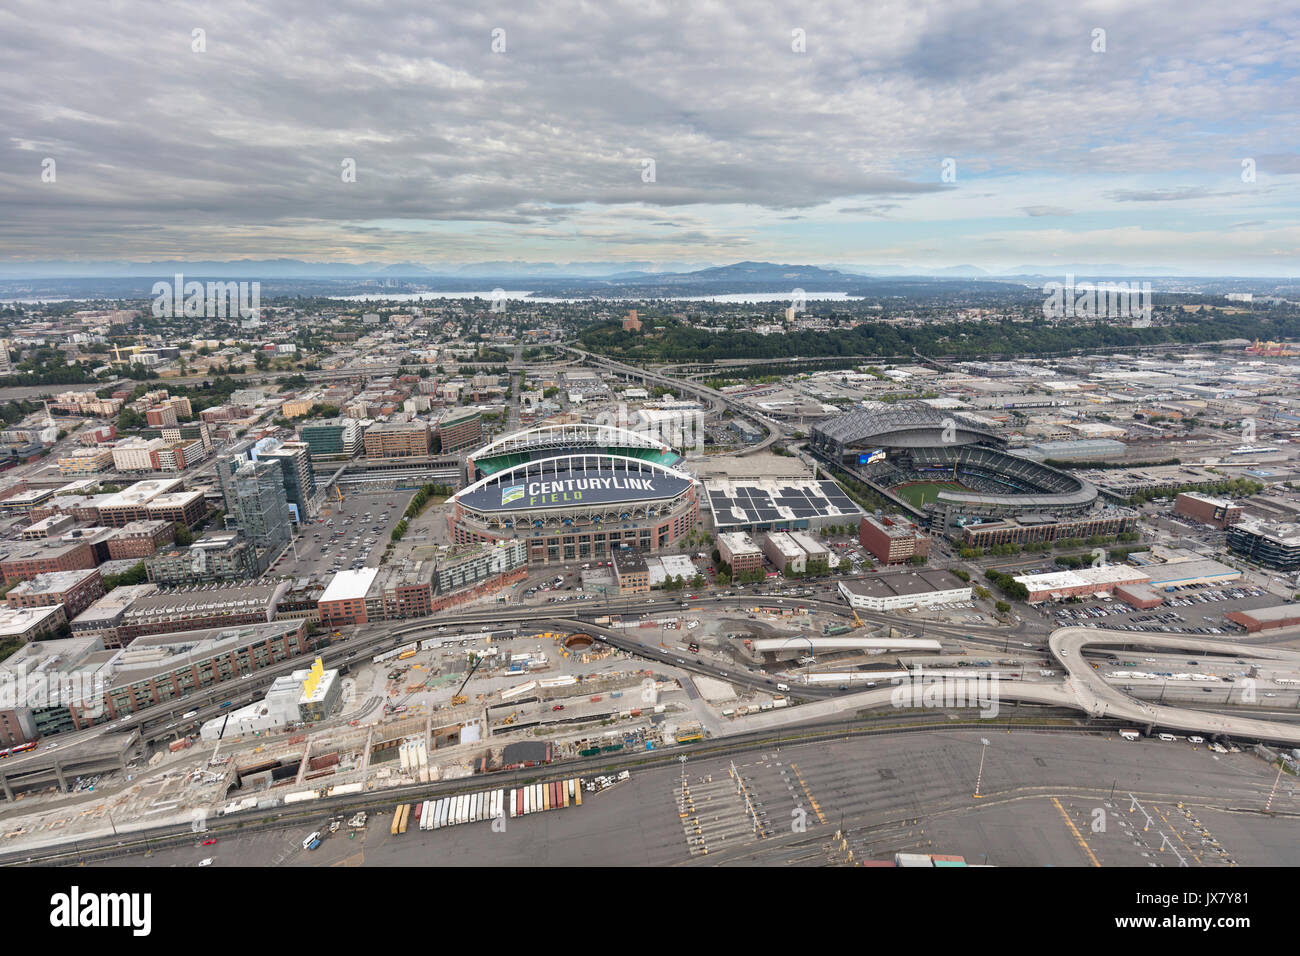 aerial view of CenturyLink Field and Safeco Field stadiums, Seattle, Washington State, USA Stock Photo